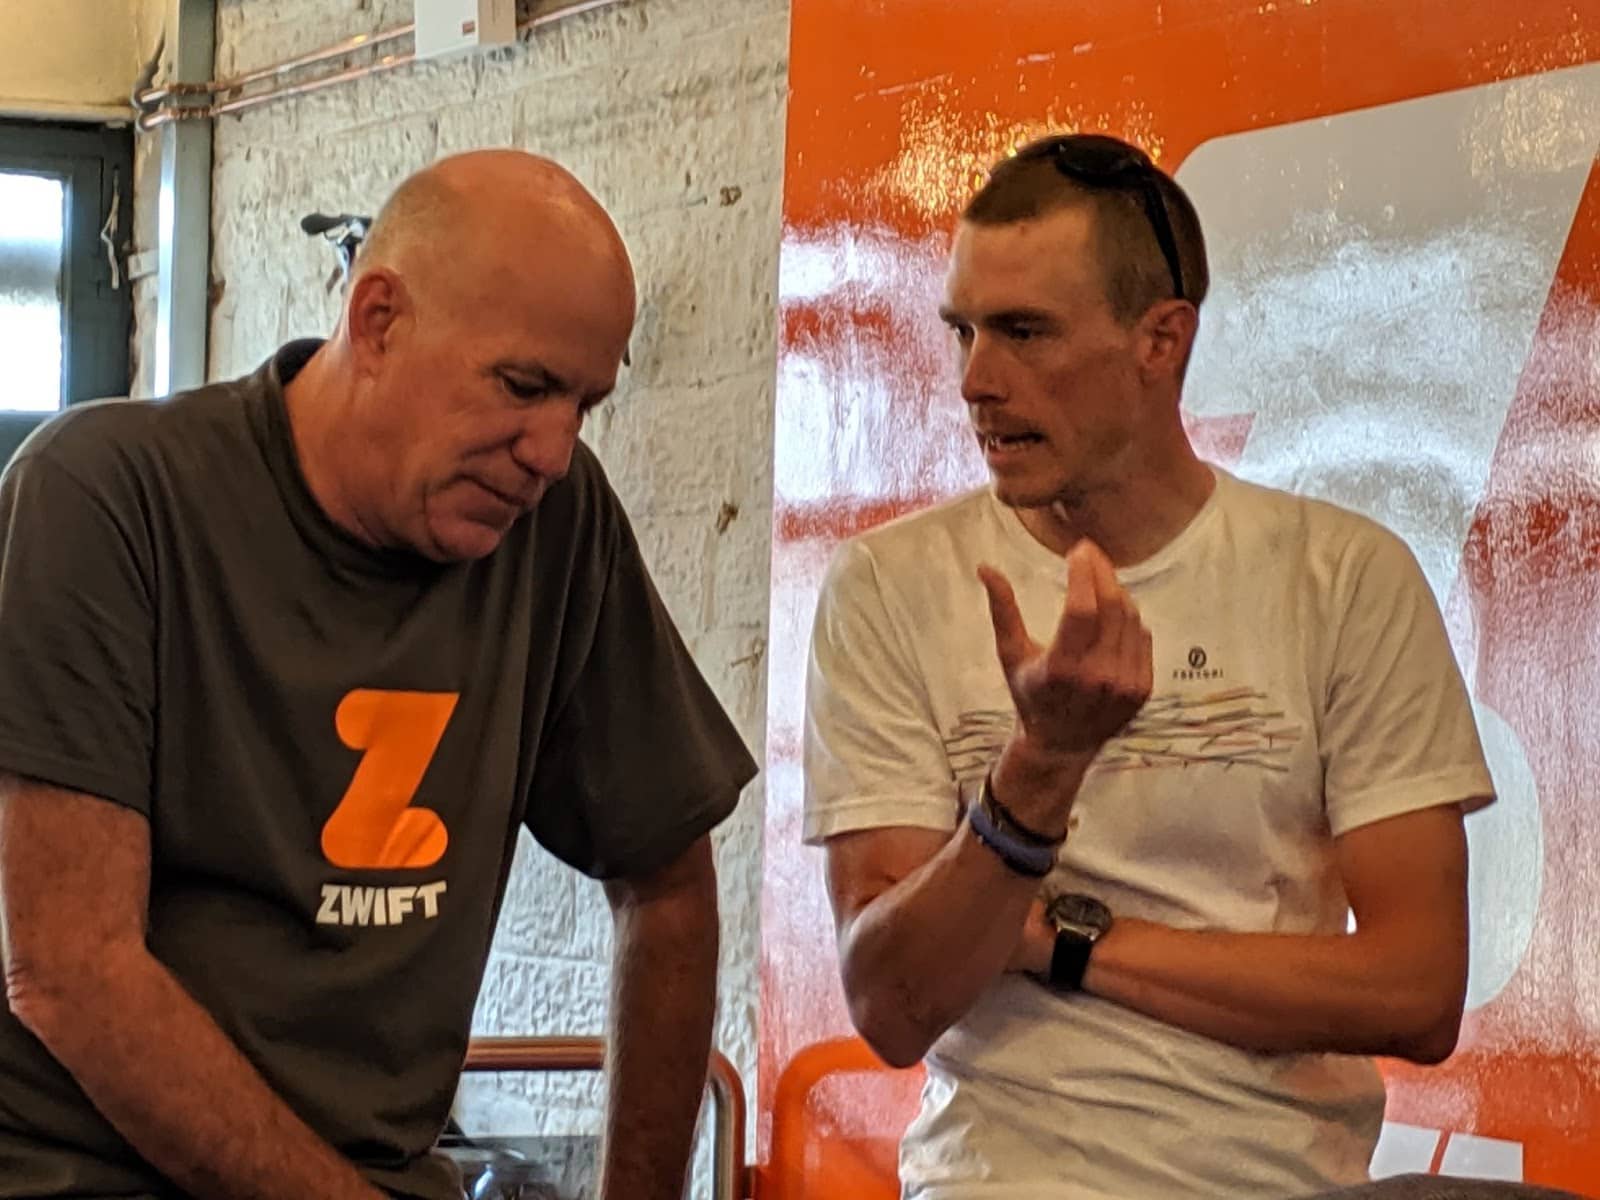 Cycling announcer for Zwift Dave Towle